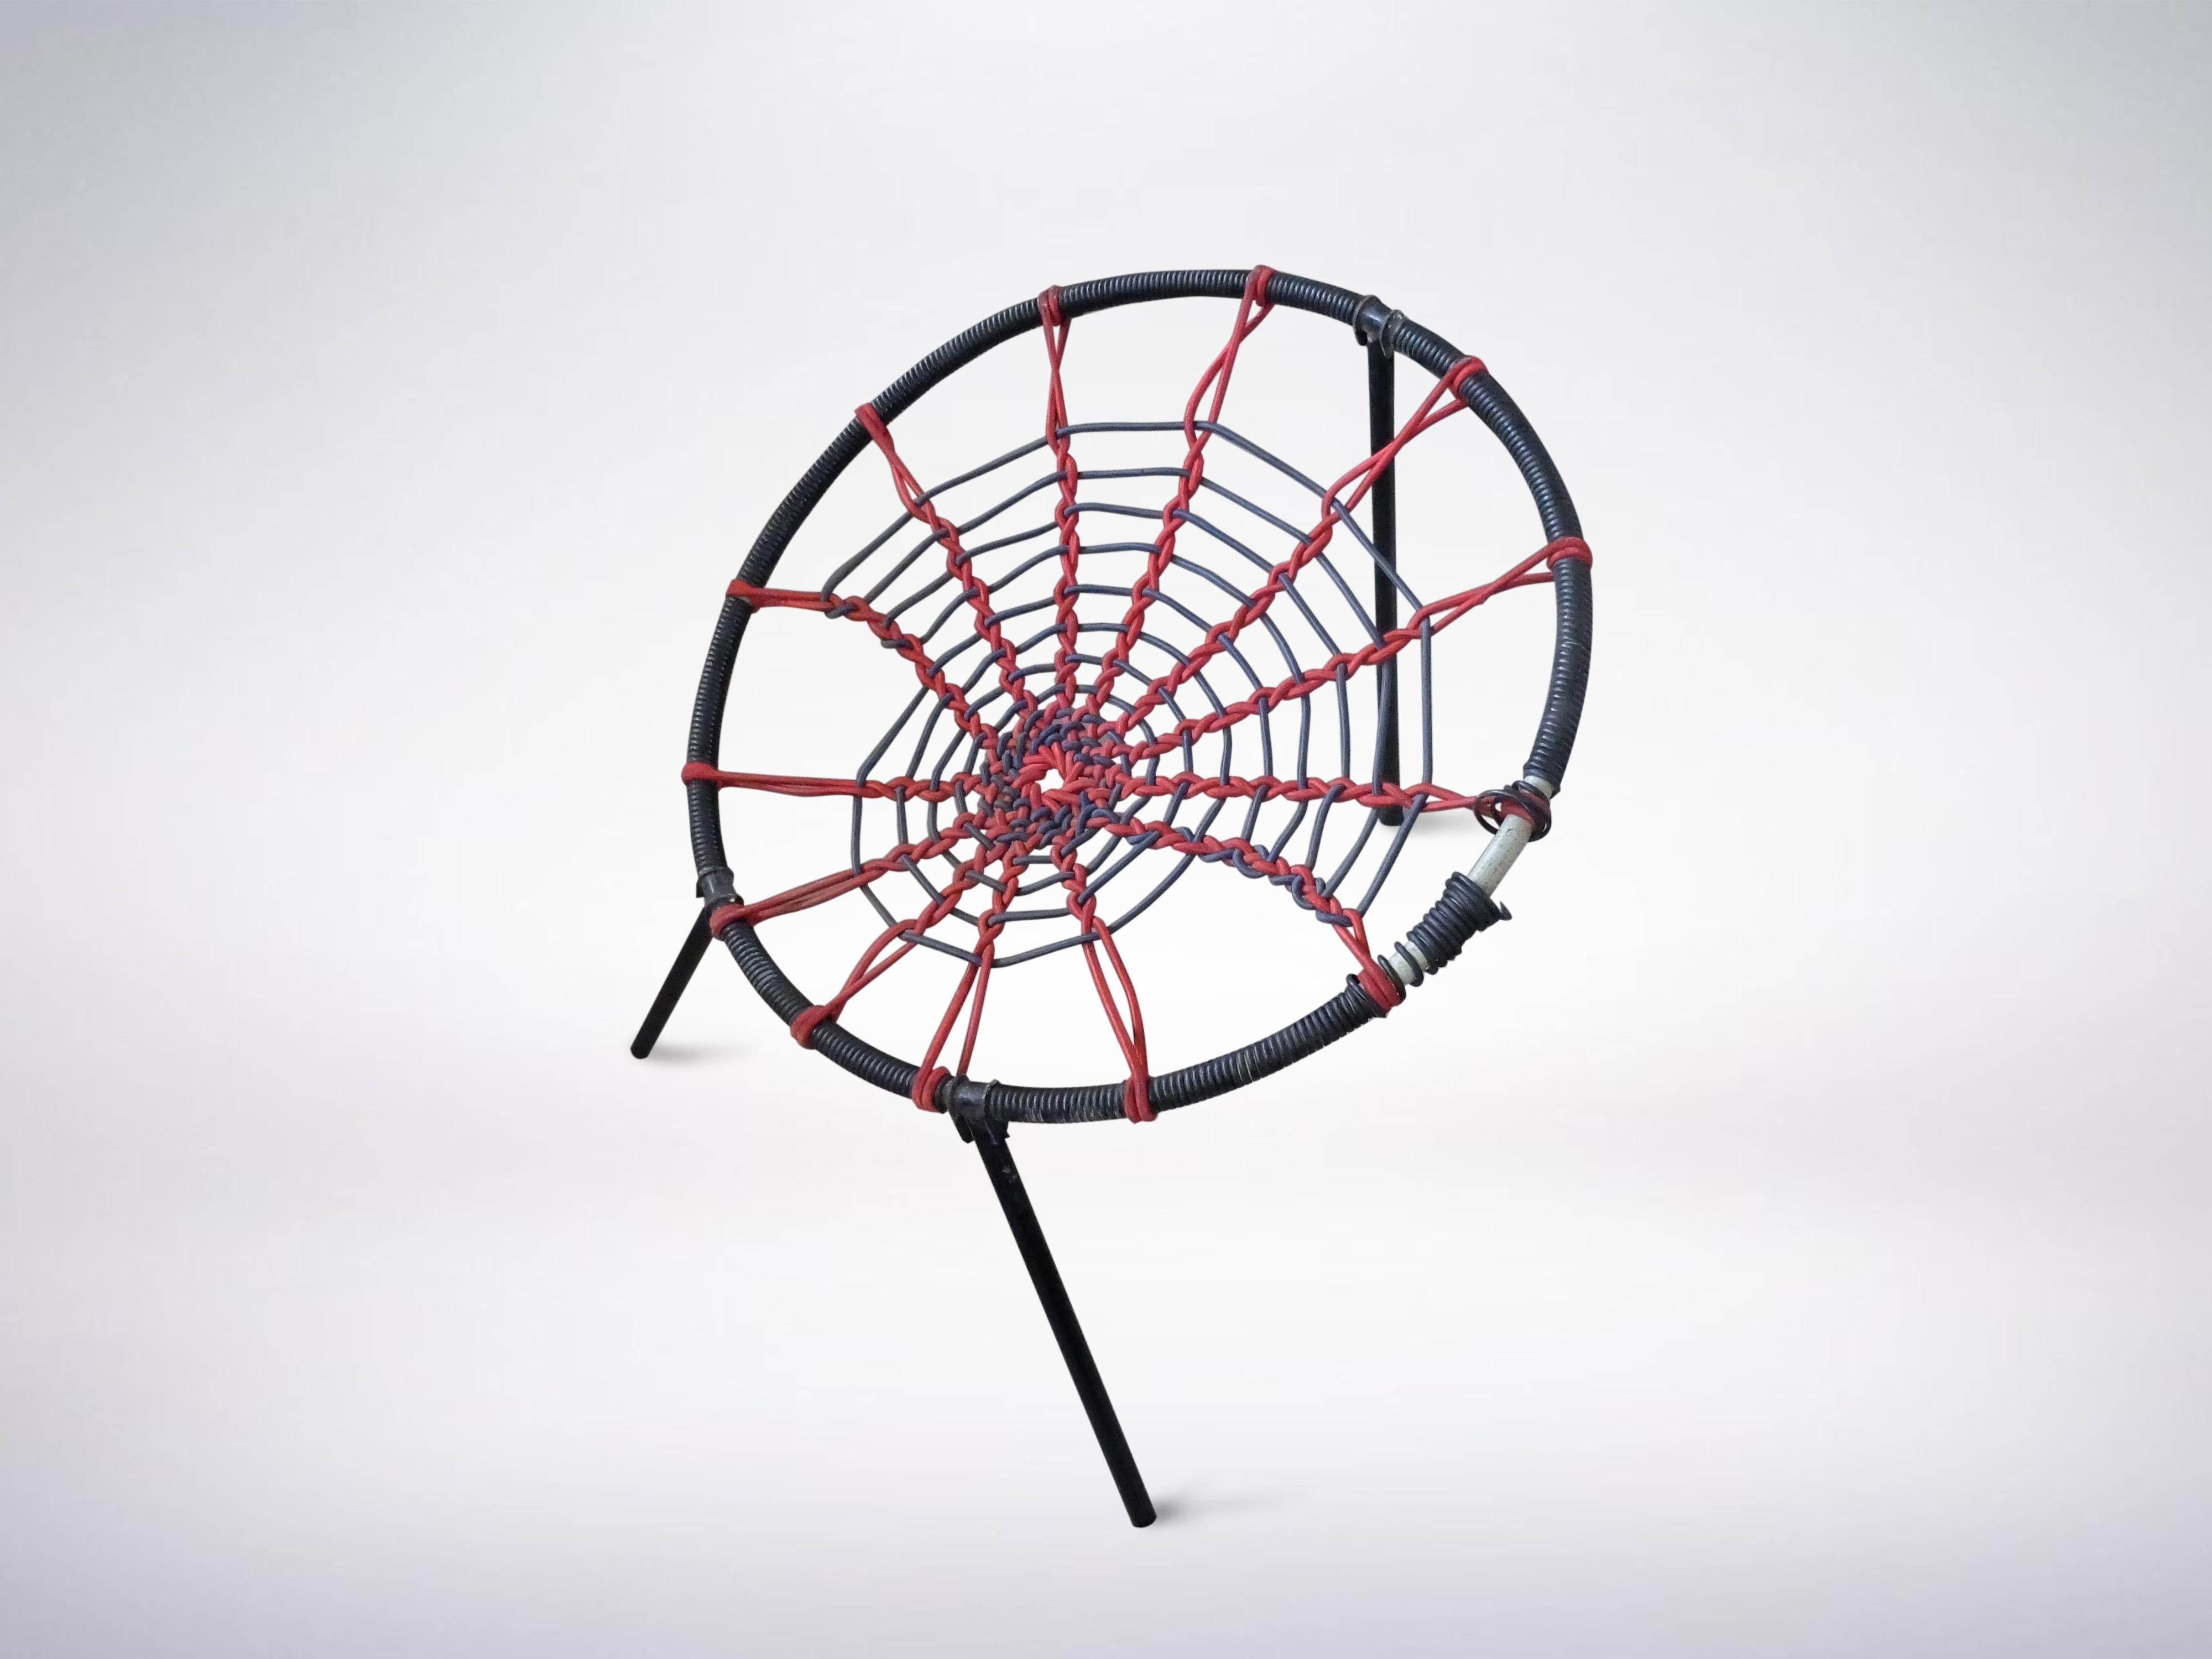 Hoffer, midcentury spider chair for Plan O, 1950s

Stunning spider chair designed by Hoffer circa 1958 for Plan O. It has foldable circular tubular steel frames with an elastic cord seat recalling a spider web.

The characteristic shape of the